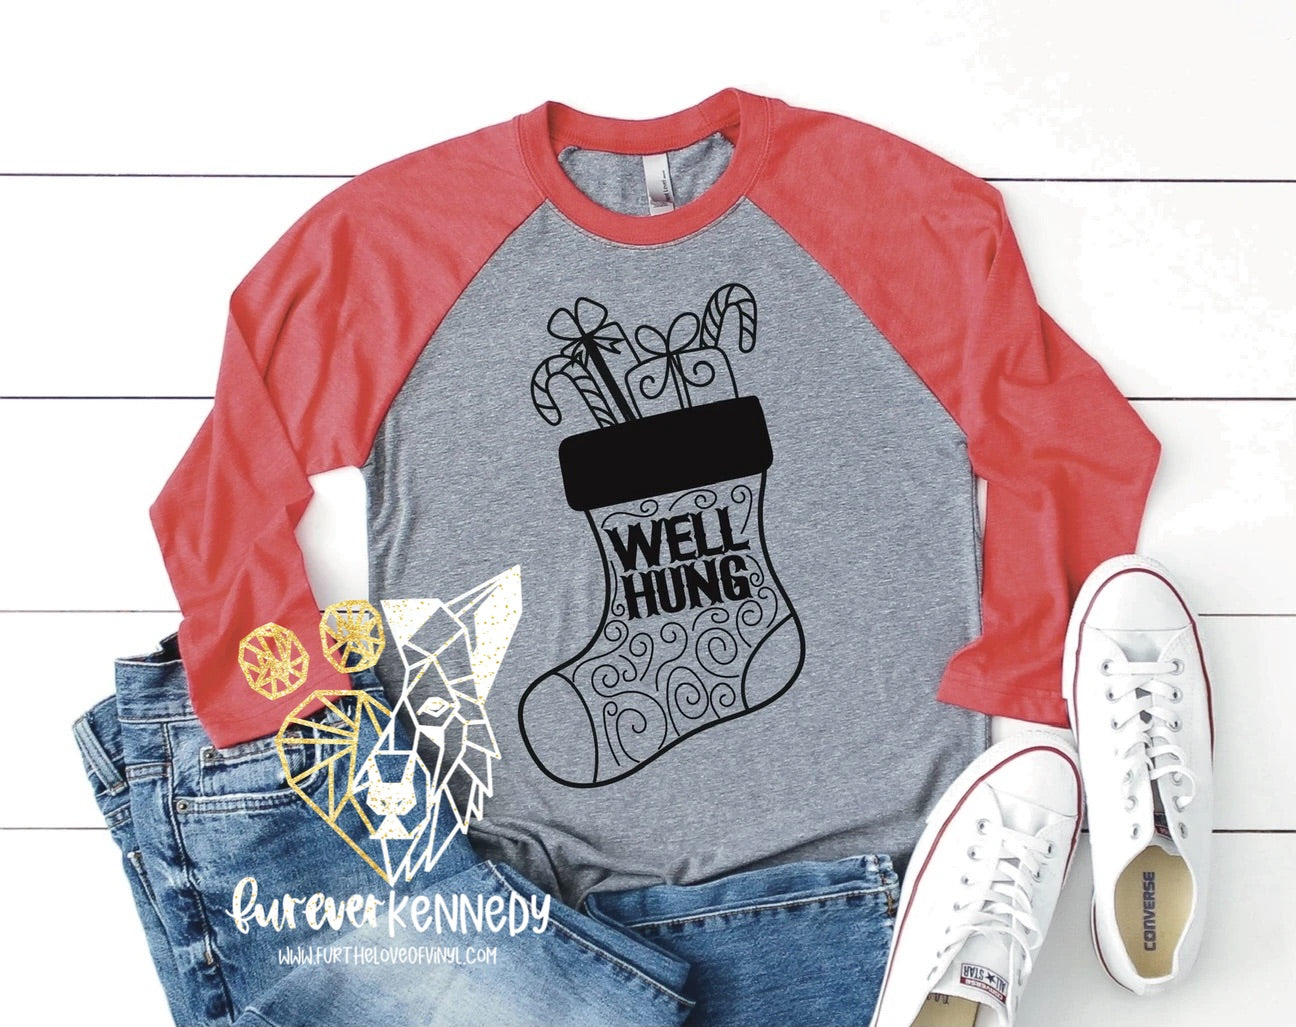 (MTO) Apparel: Well hung